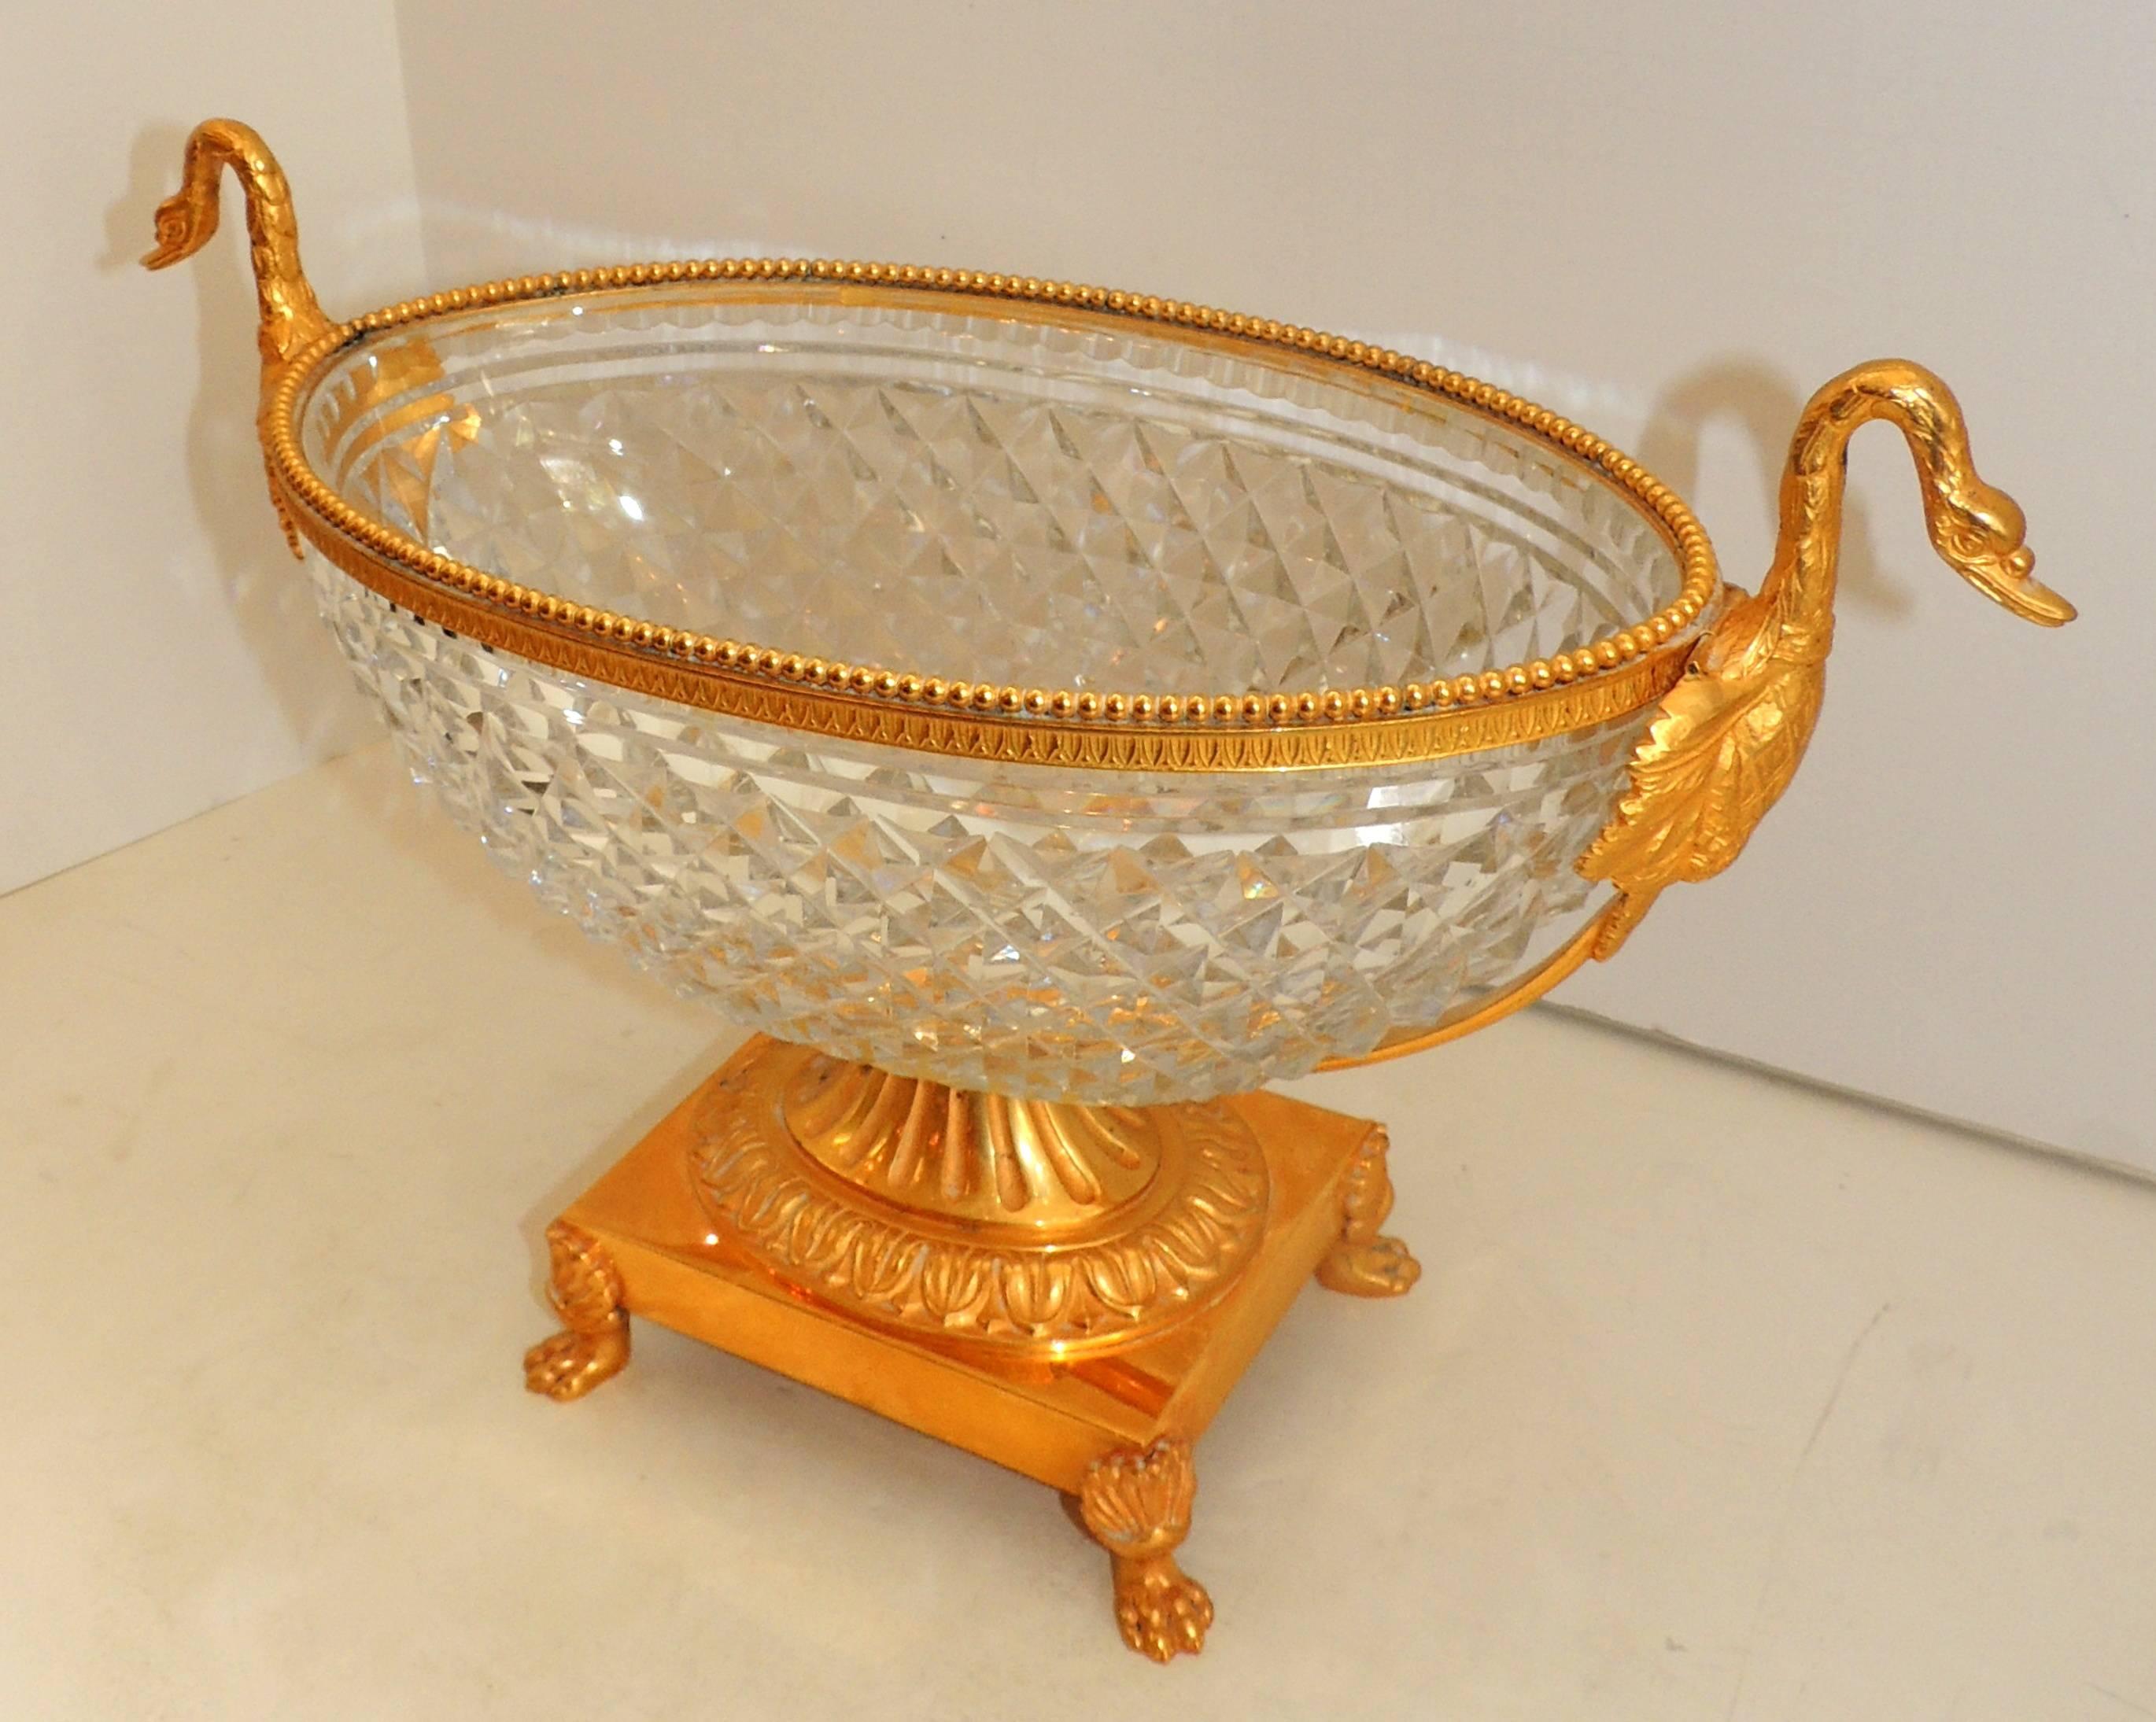 A wonderful French neoclassical motif gilt doré bronze centrepiece with swan handles set in a cut crystal bowl.
This is a very stately and impressive elegant centerpiece, with very fine detail.